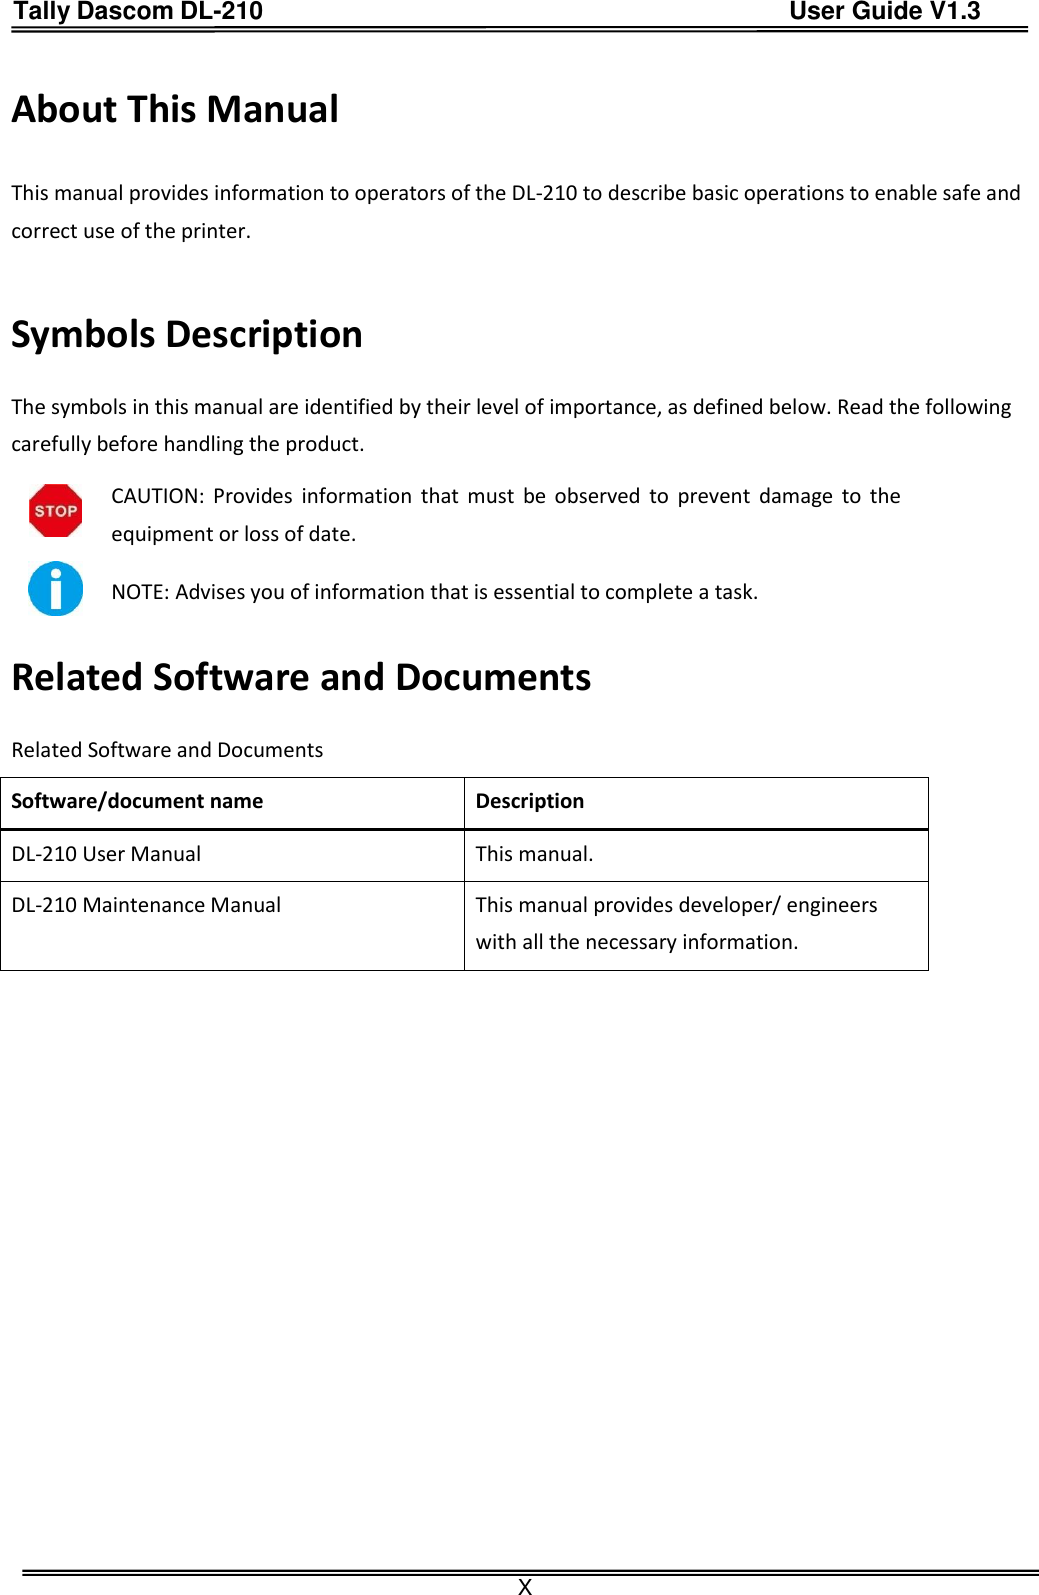 Tally Dascom DL-210                                          User Guide V1.3  X About This Manual This manual provides information to operators of the DL-210 to describe basic operations to enable safe and correct use of the printer.  Symbols Description The symbols in this manual are identified by their level of importance, as defined below. Read the following carefully before handling the product.  CAUTION: Provides  information  that must  be  observed  to  prevent  damage  to the equipment or loss of date.  NOTE: Advises you of information that is essential to complete a task. Related Software and Documents Related Software and Documents Software/document name Description DL-210 User Manual This manual. DL-210 Maintenance Manual This manual provides developer/ engineers with all the necessary information. 